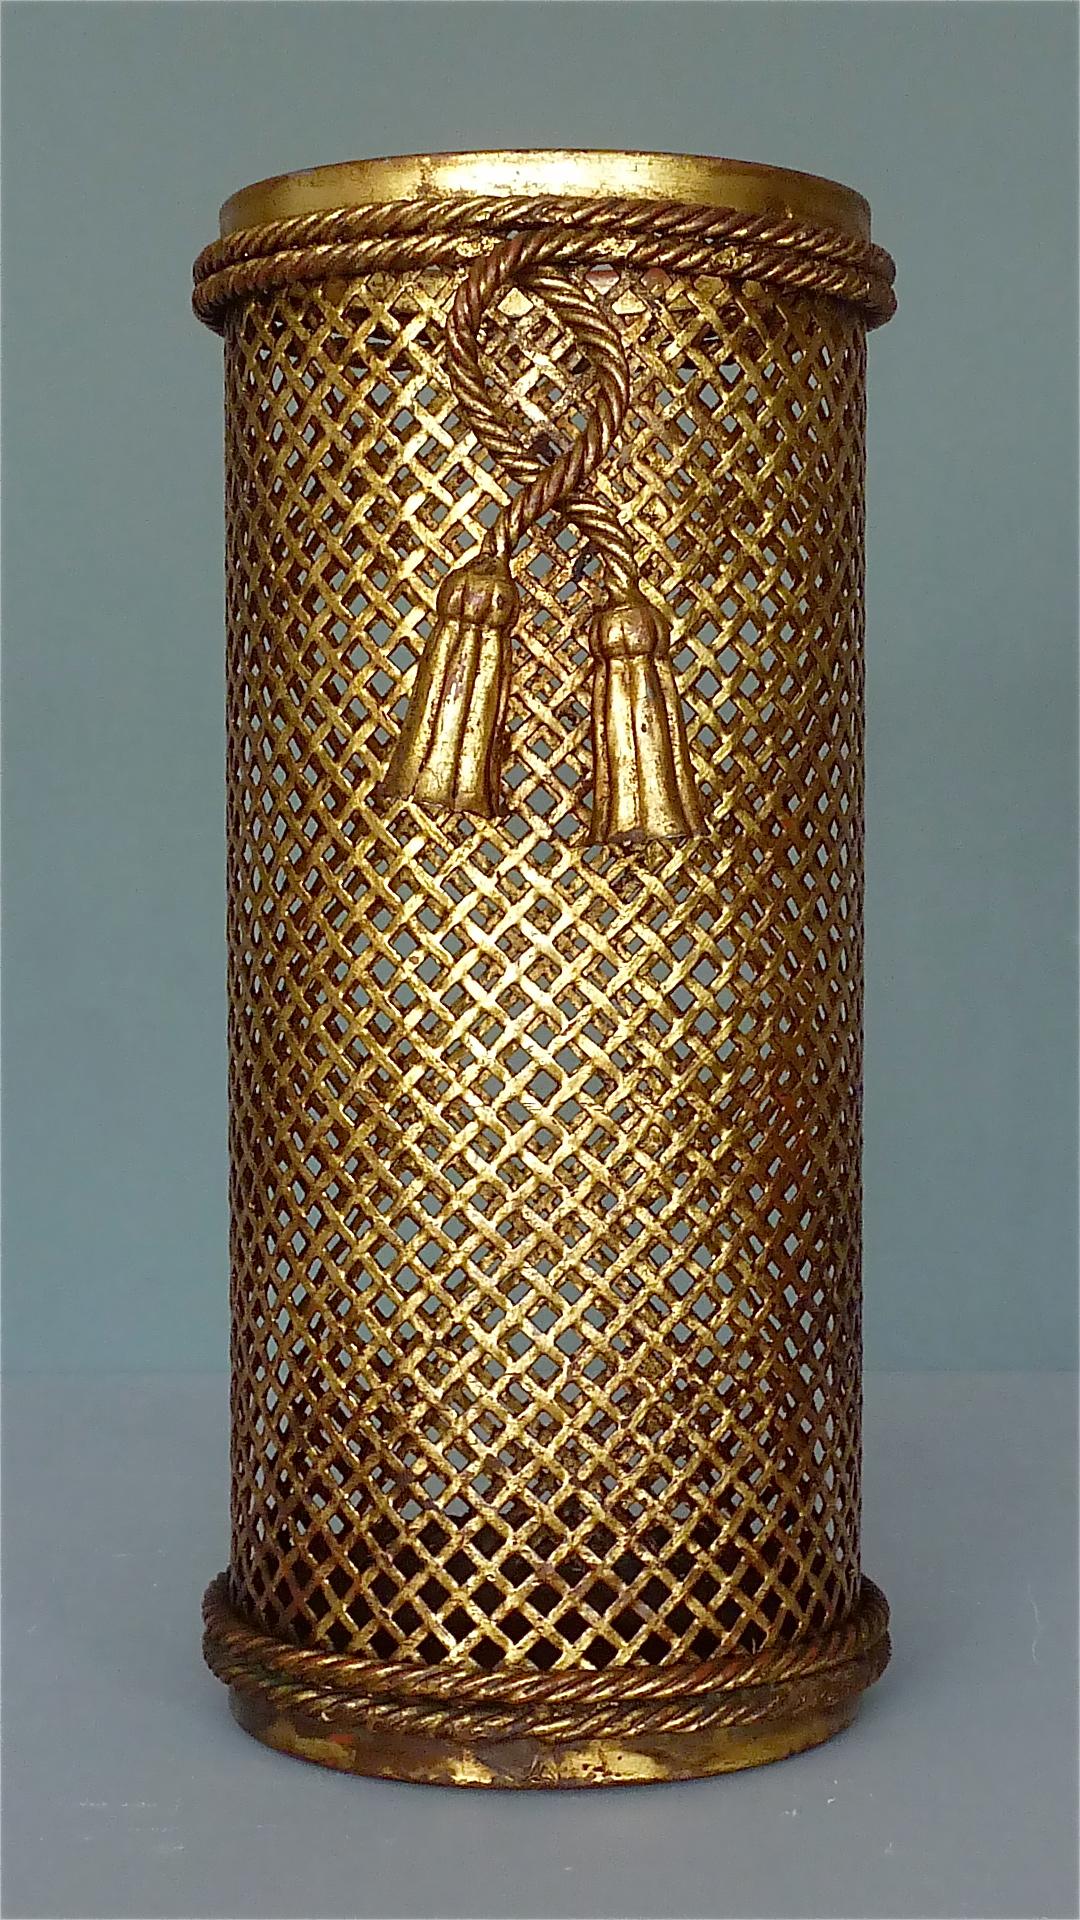 Early authentic and fabulous of vintage midcentury umbrella stand designed by Hans Kögl in the style of Hollywood Regency made in Italy around 1940-1950. It is made of woven gilt metal on a red ground with bent rope and knotted tassel detail which